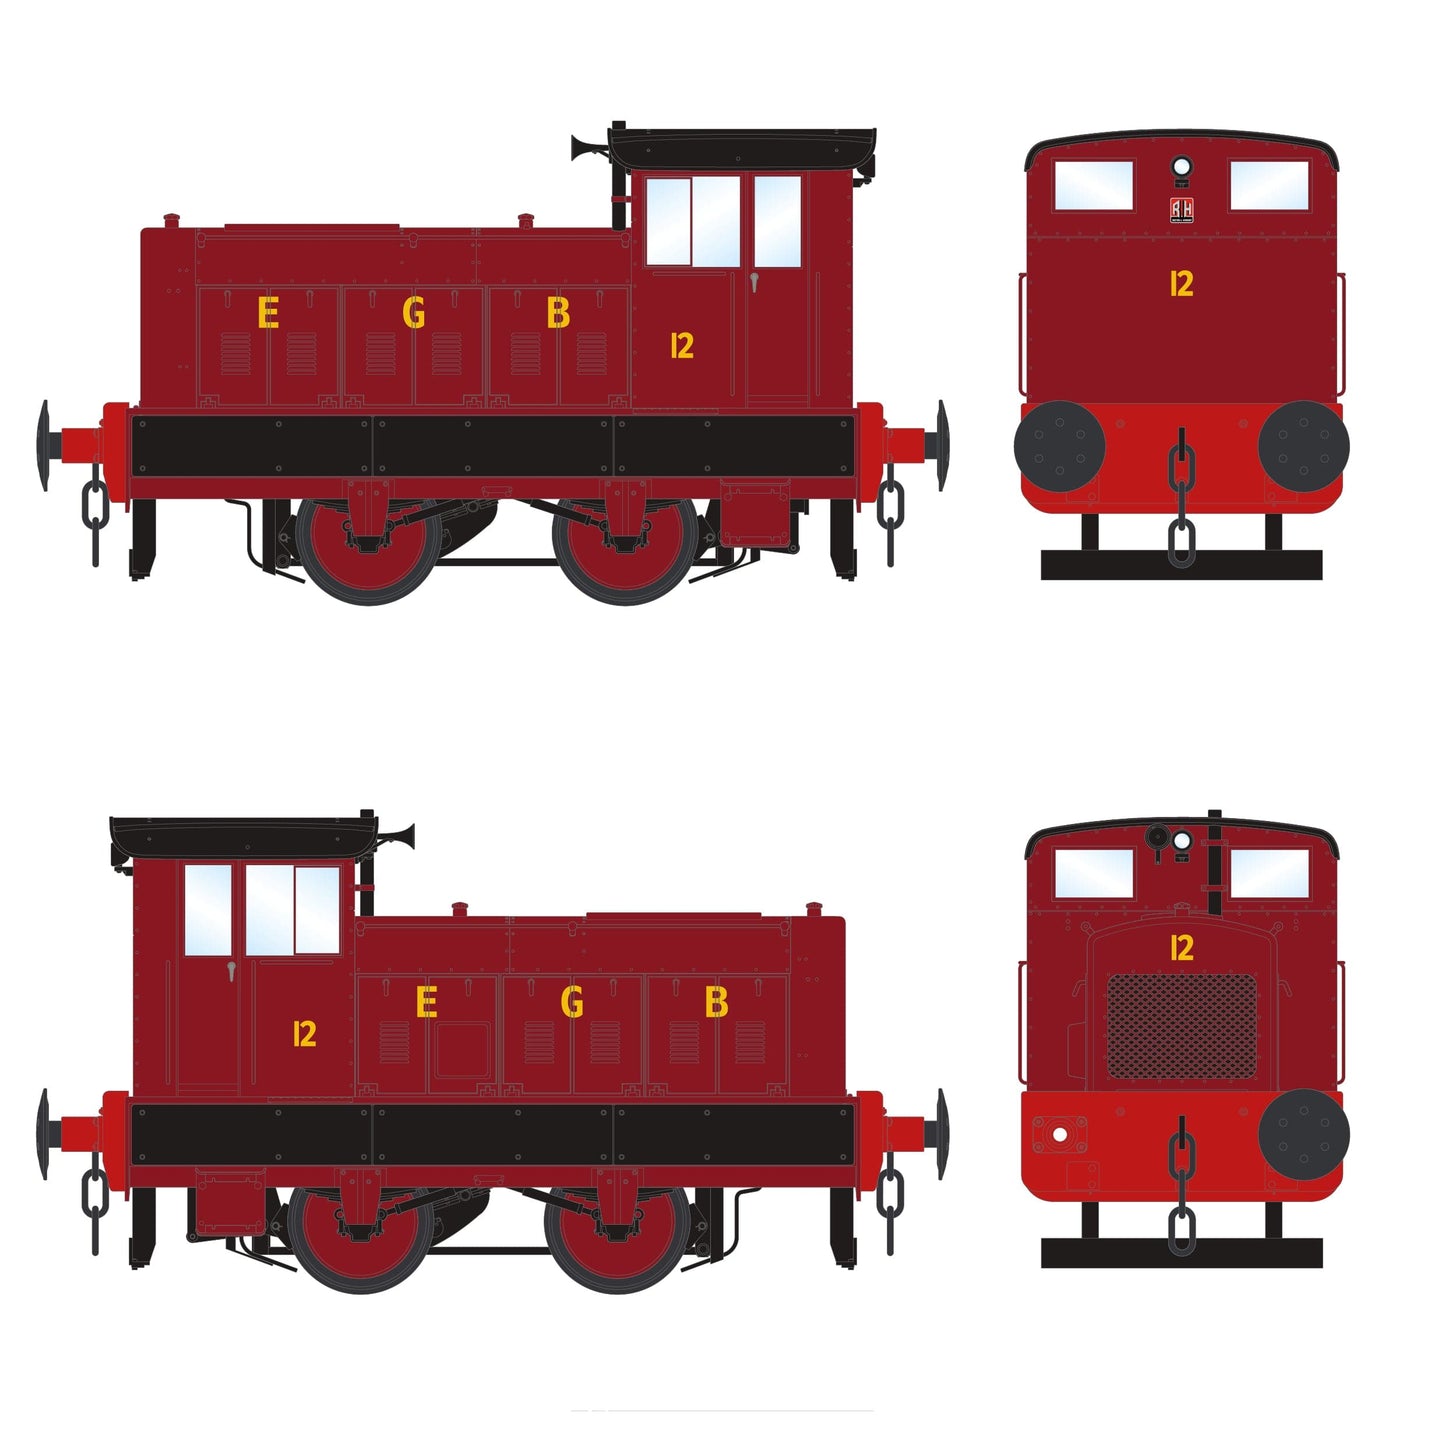 245033/1947 - Eastern Gas Board - Tottenham No. 12 - Dark Red - DCC Sound Fitted